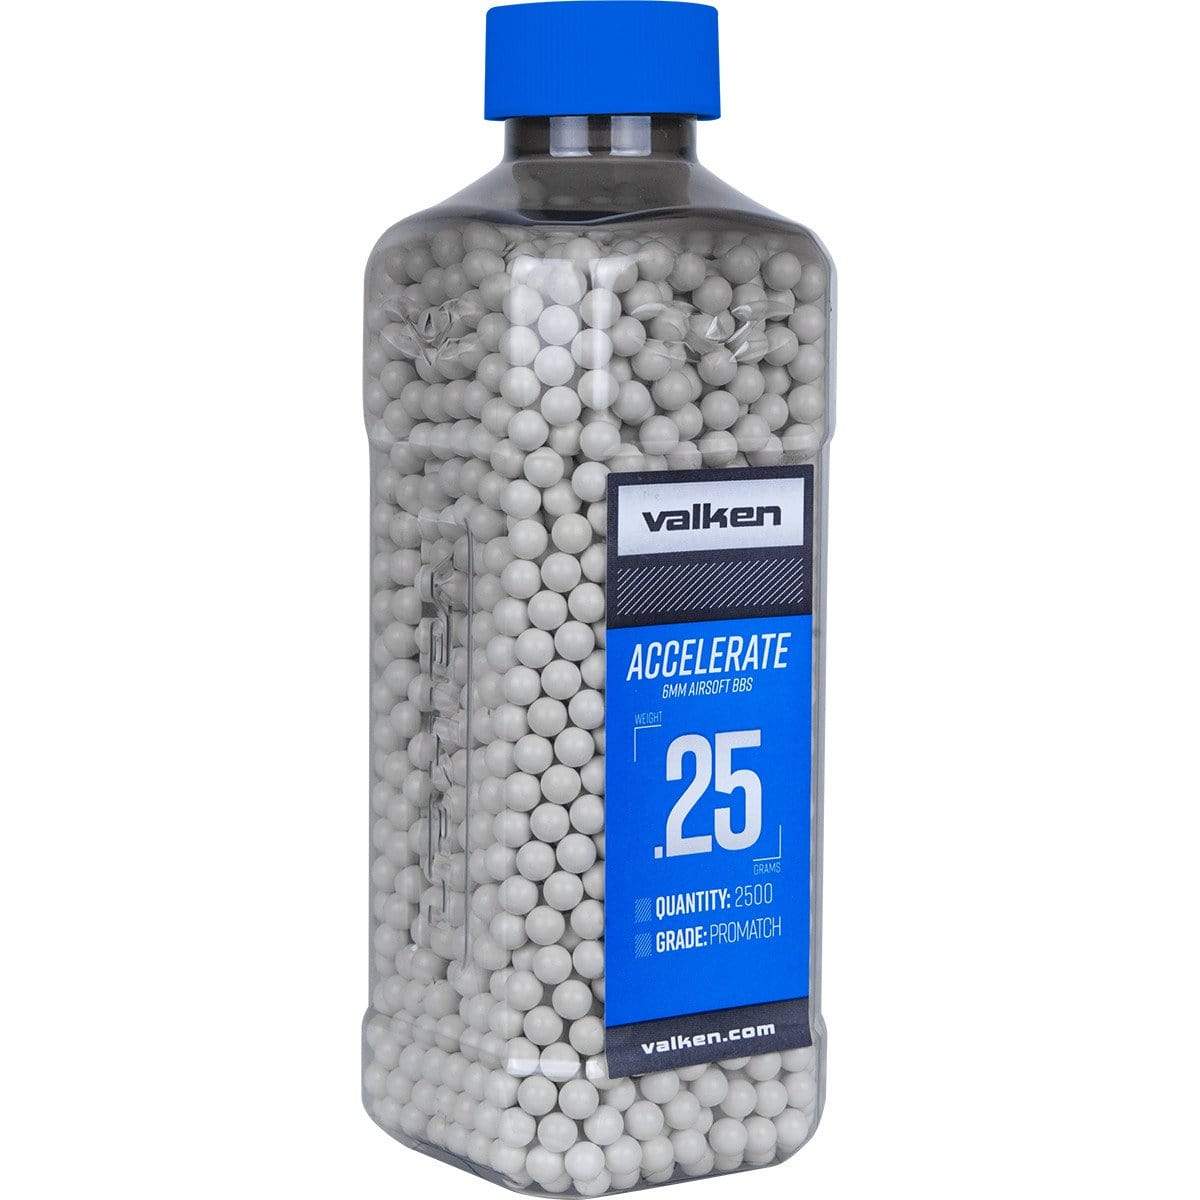 Valken Accelerate Airsoft BBs - 0.25G-2500CT-White - Eminent Paintball And Airsoft